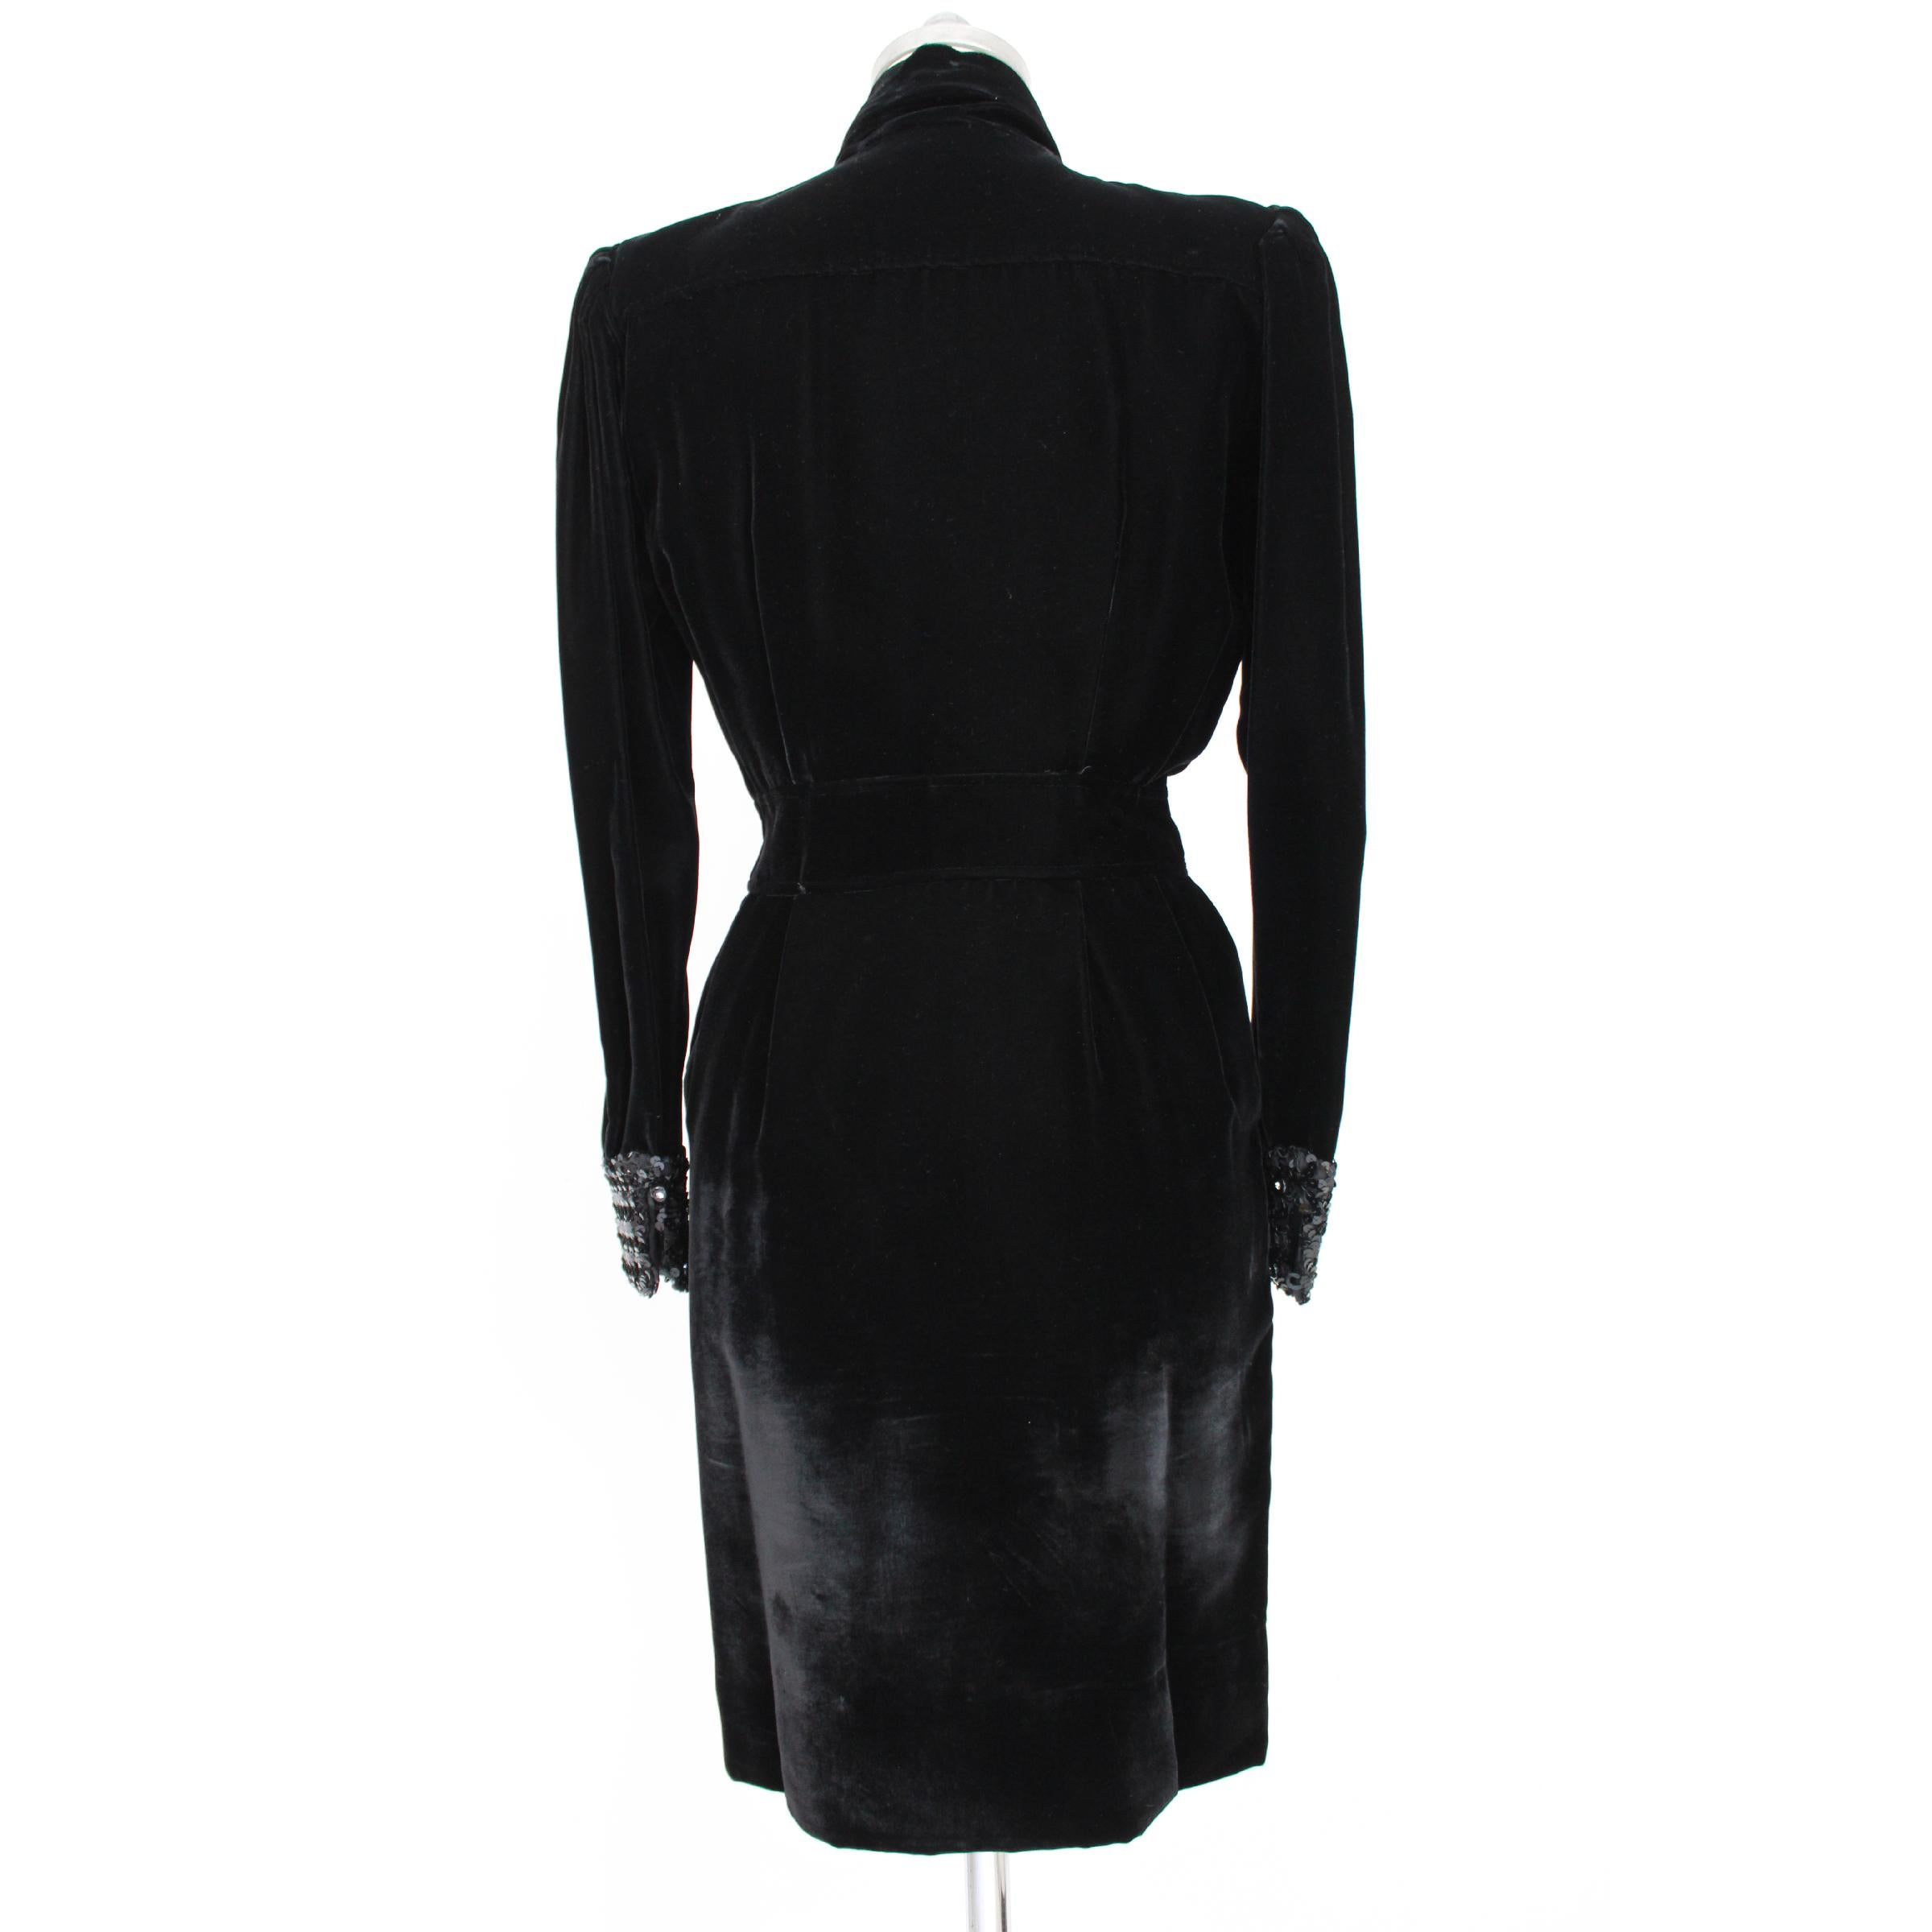 Vintage Emanuel Ungaro 80s evening dress, black, 100% silk, 100% viscose. Soft velvet fabric, details in black sequins and closing with swaroski buttons, zipper on the side, lined, bow on the neck. Made in Italy. Excellent vintage condition.

Size: